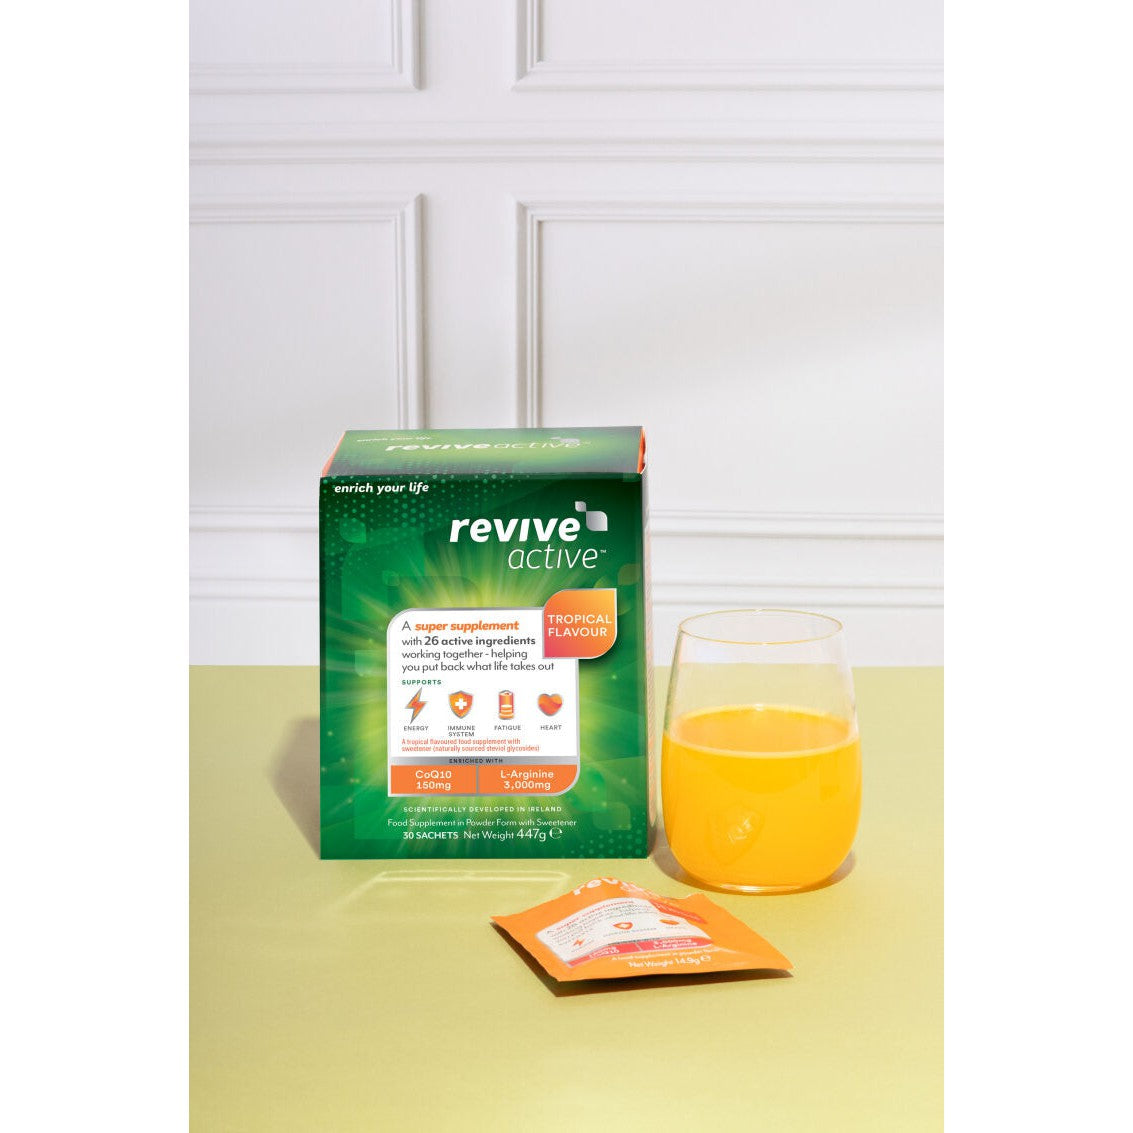 Revive Active Tropical Super Supplement 30 Day Pack